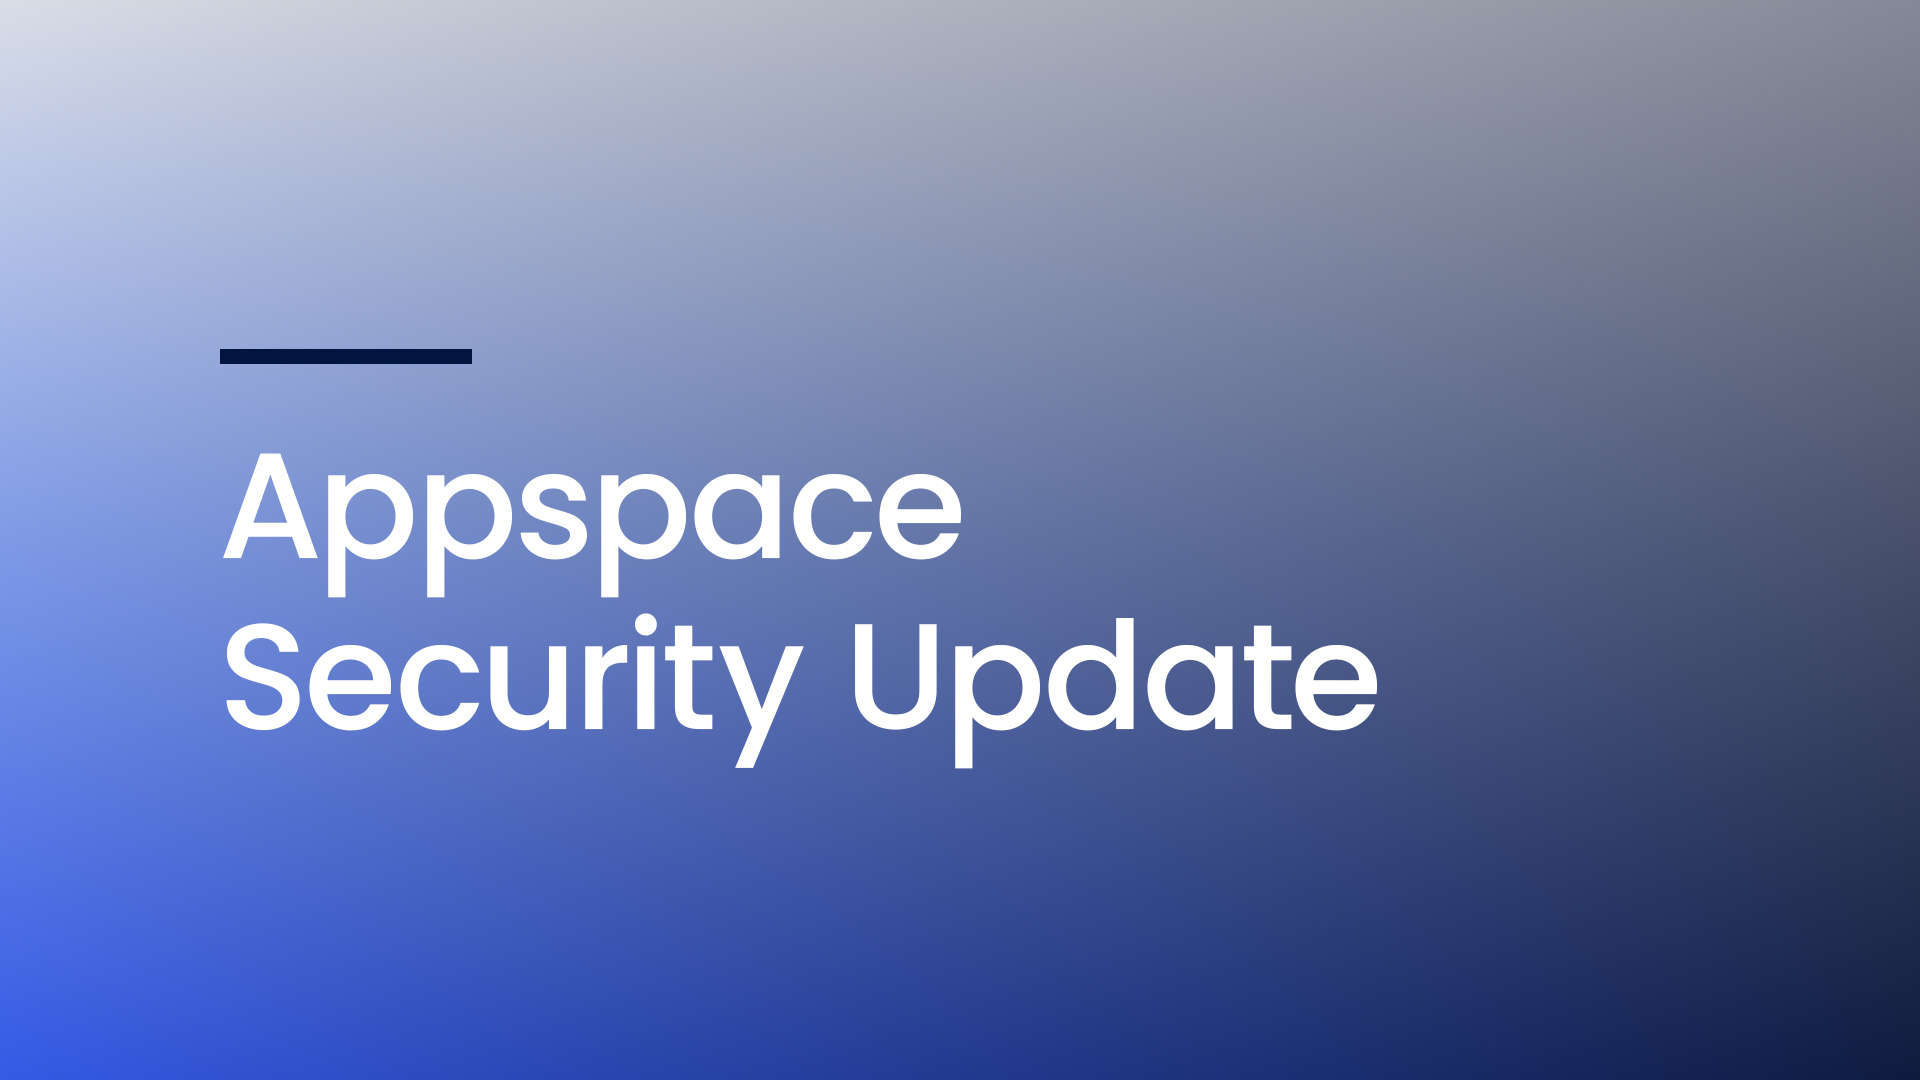 Appspace is not Impacted by the Log4j Vulnerability